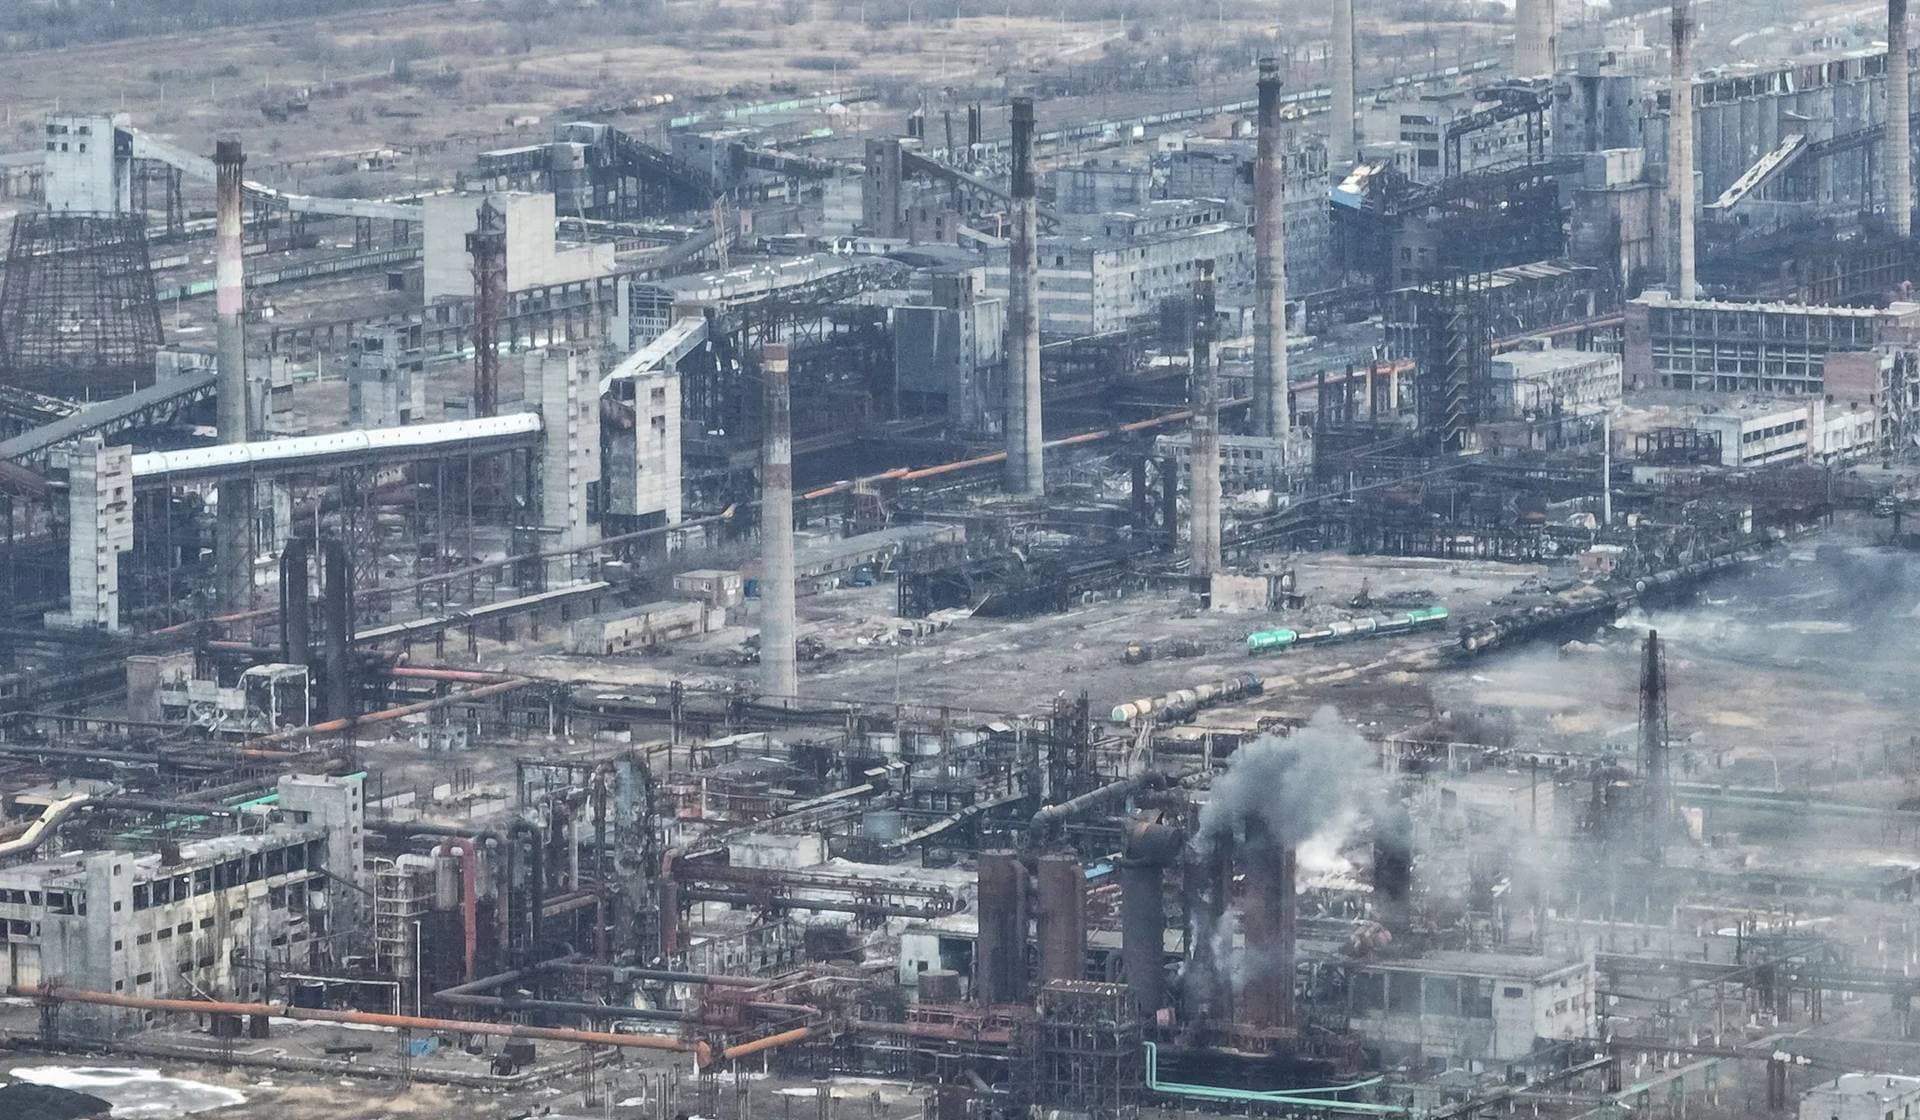 The Avdiivka Coke and Chemical Plant, recently captured by Russian troops, in the front line town of Avdiivka